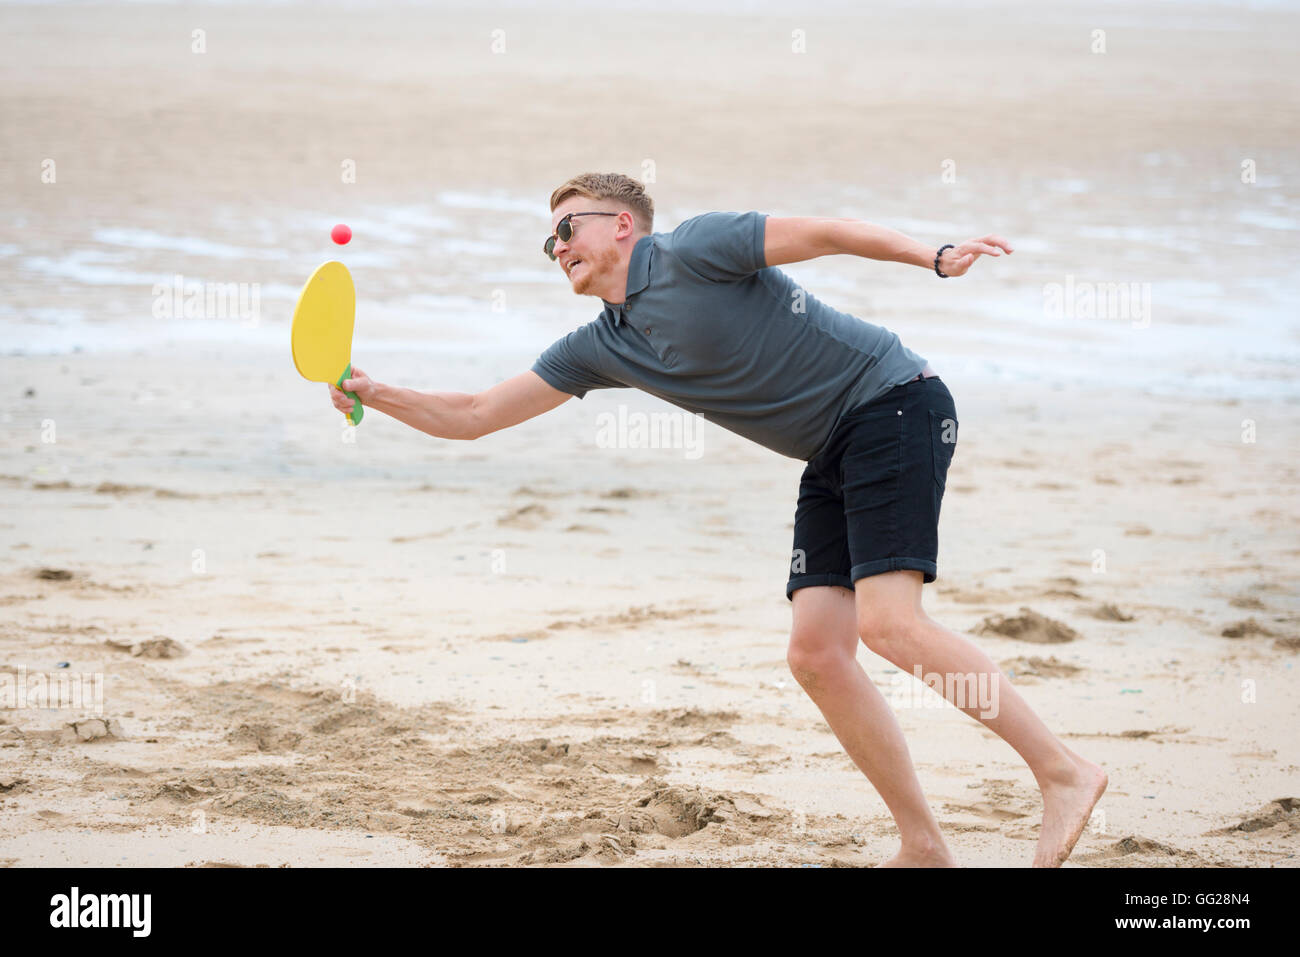 A young adult man playing with a bat and ball on a beach stretching to reach the ball Stock Photo